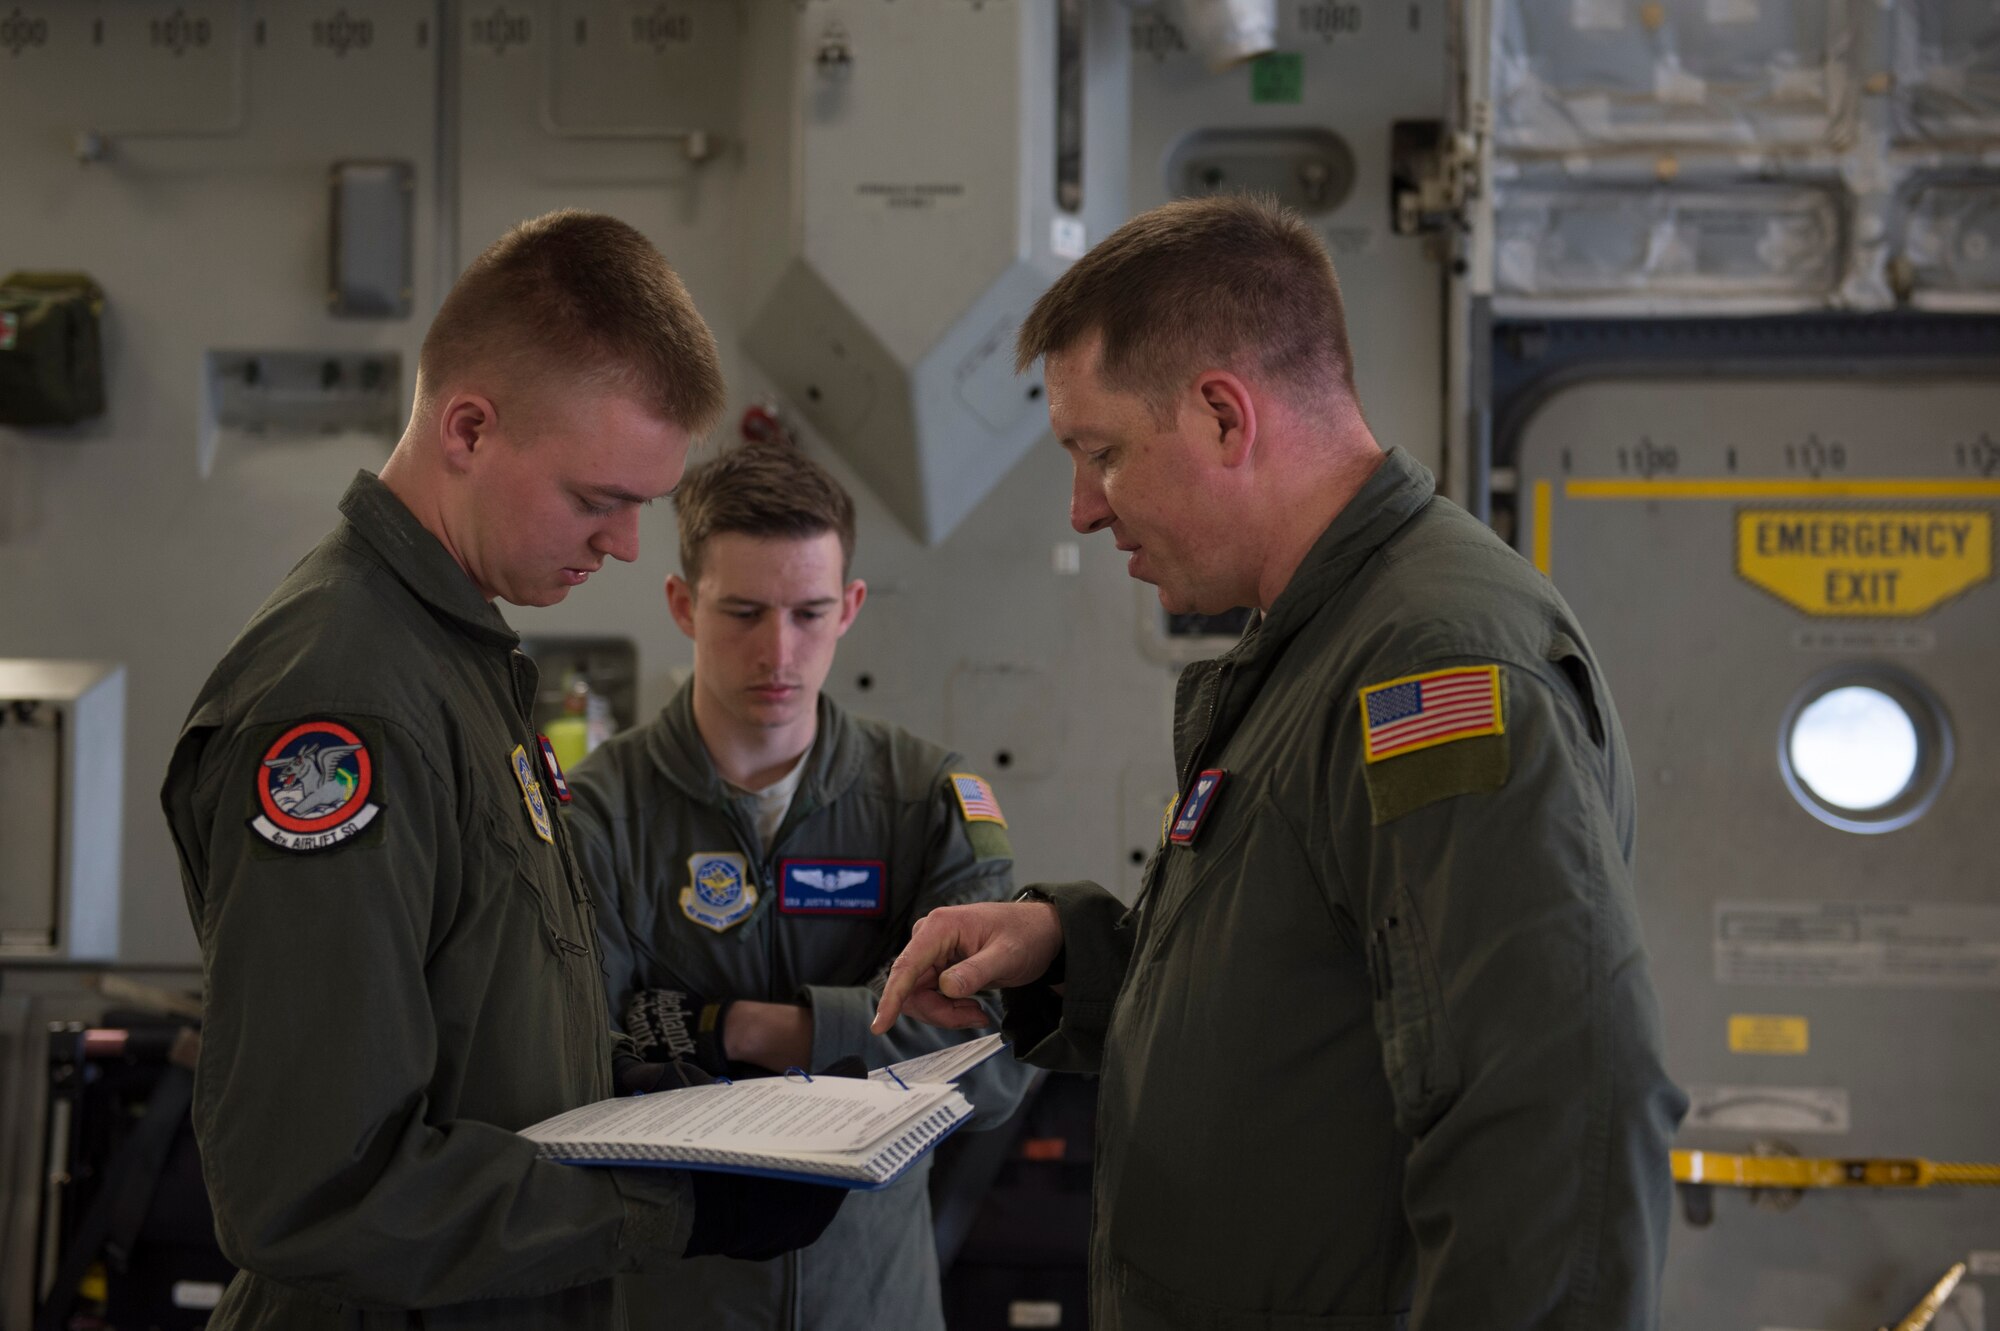 From Left, Airman 1st Class Alexander Donaldson, Senior Airman Justin Thompson and Tech Sgt. Brian Layton, 4th Airlift Squadron loadmasters review a checklist May 21, 2018, at Joint Base Lewis-McChord, Wash. Loadmasters are responsible for everything that goes on in the cargo compartment of the aircraft from loading and securing cargo to ensuring passengers have what they need during flight. (U.S. Air Force photo by A1C Sara Hoerichs)